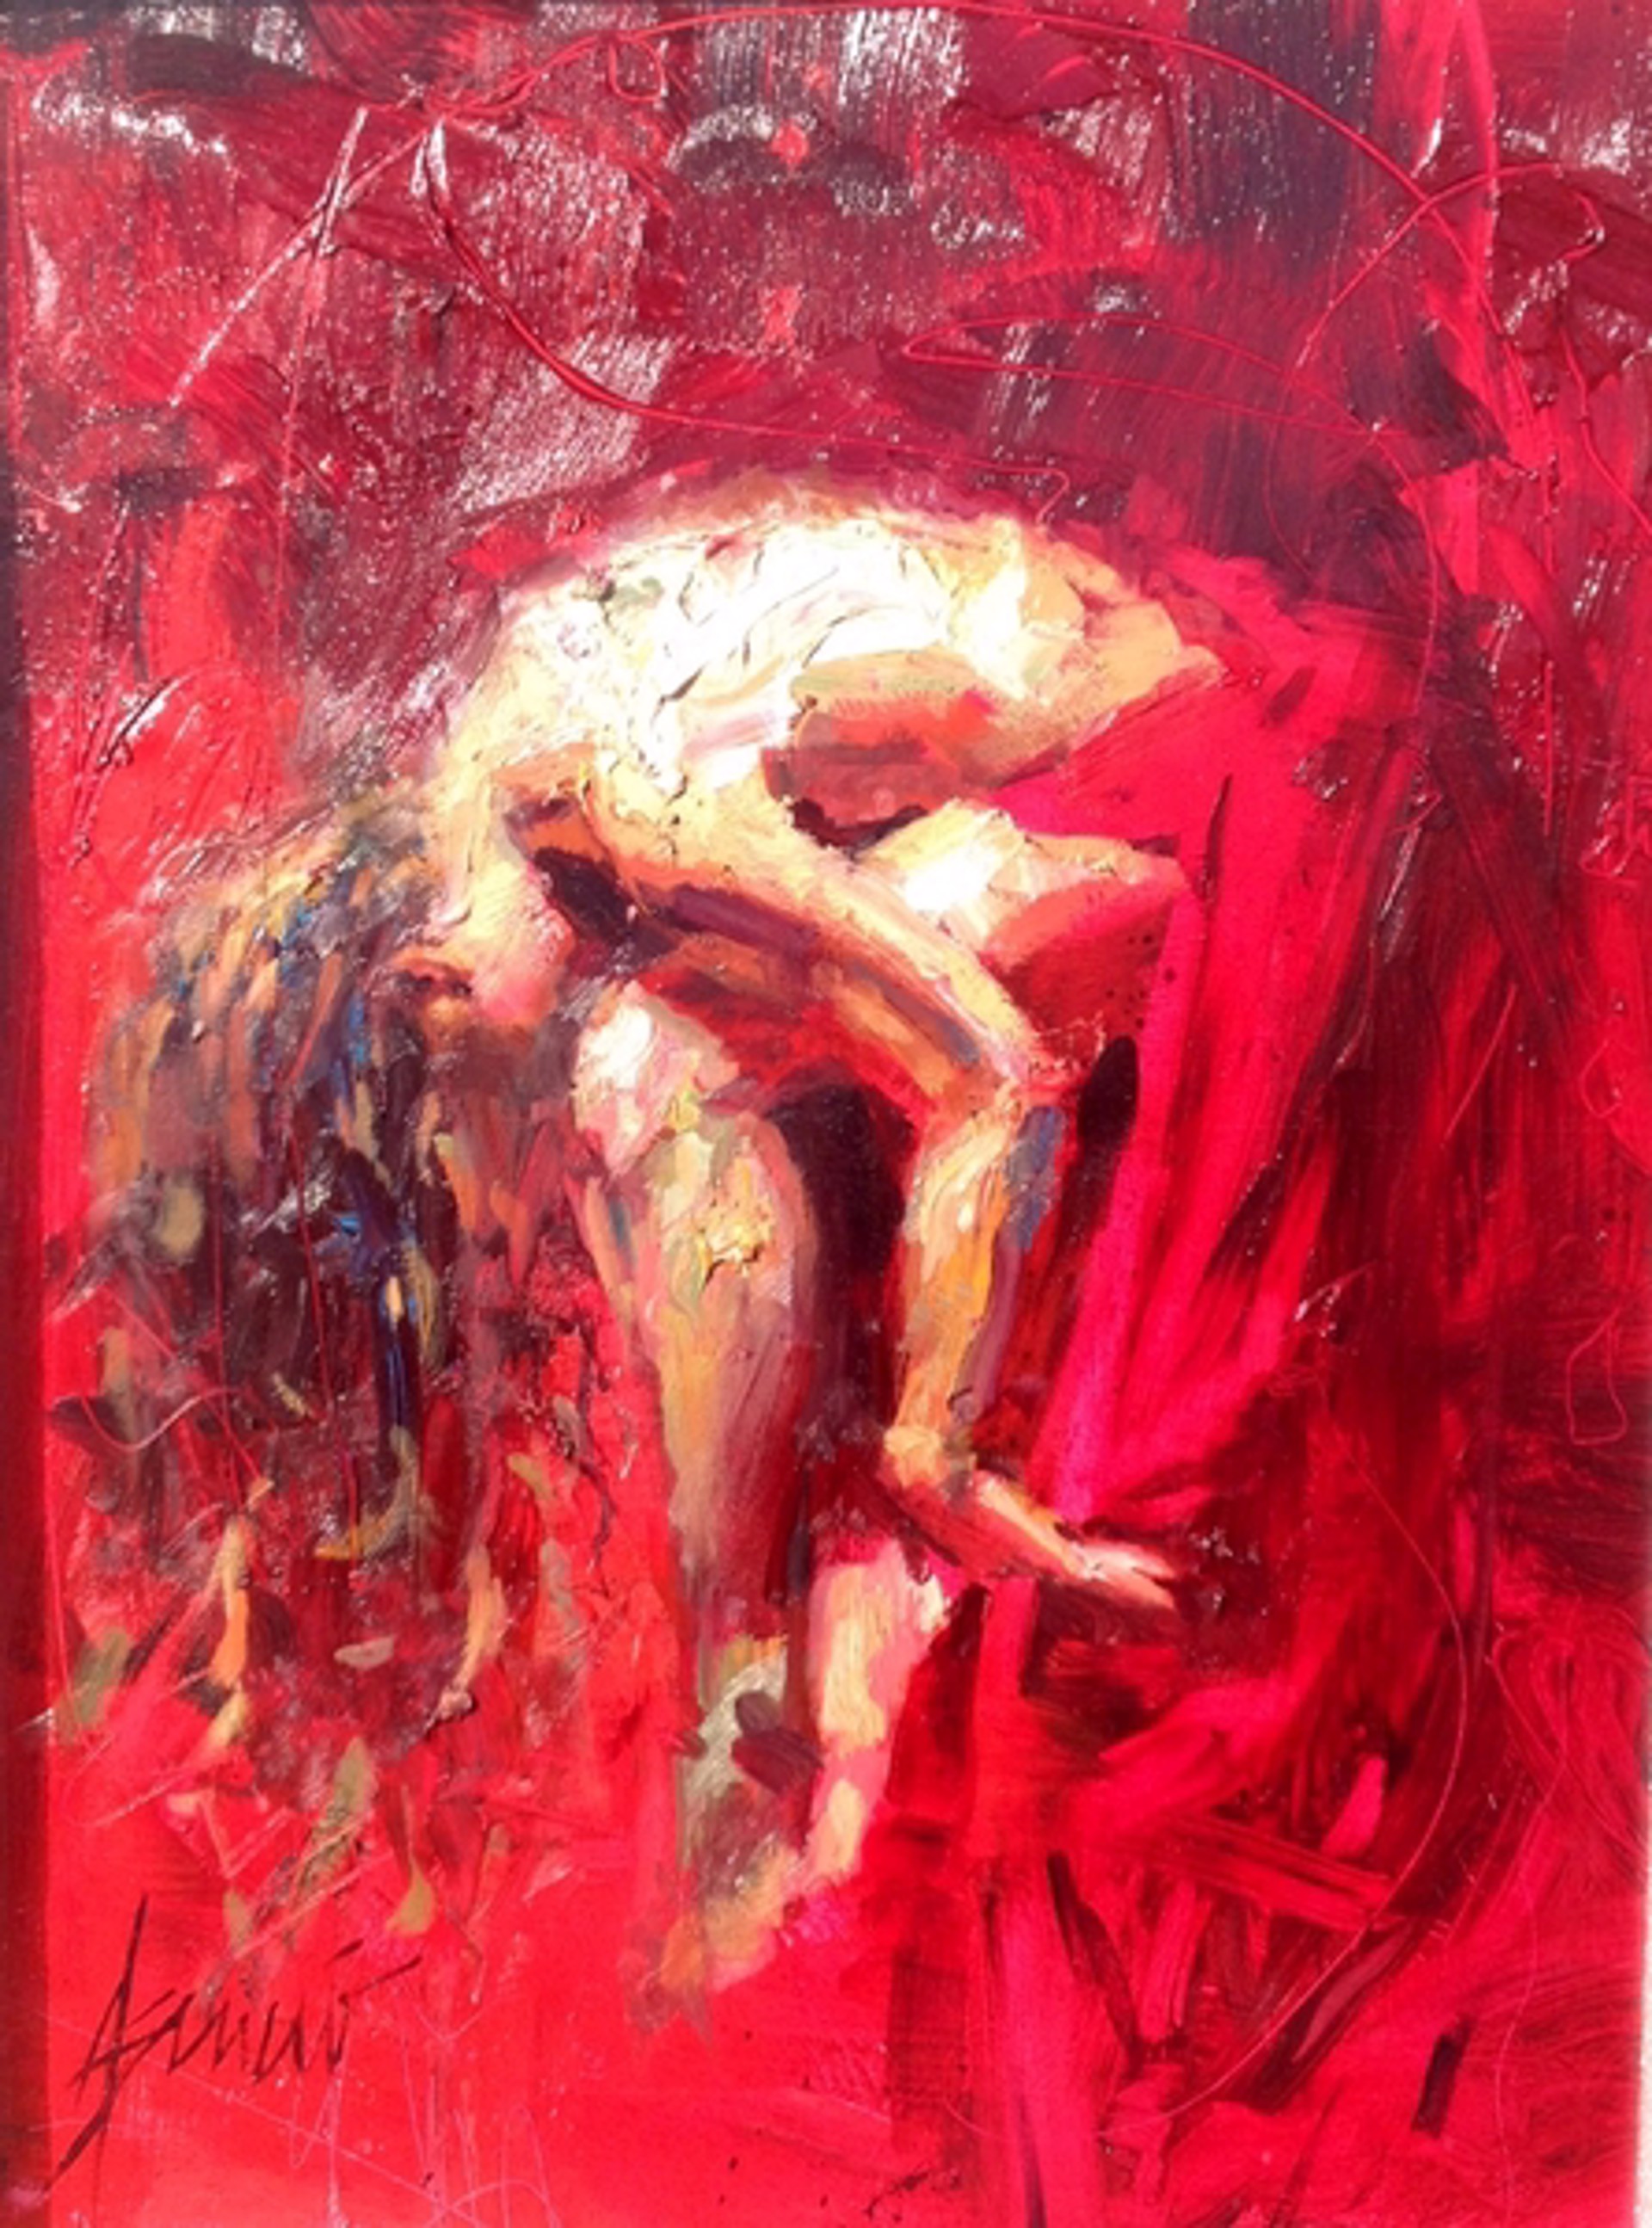 Solace revisit by Henry Asencio